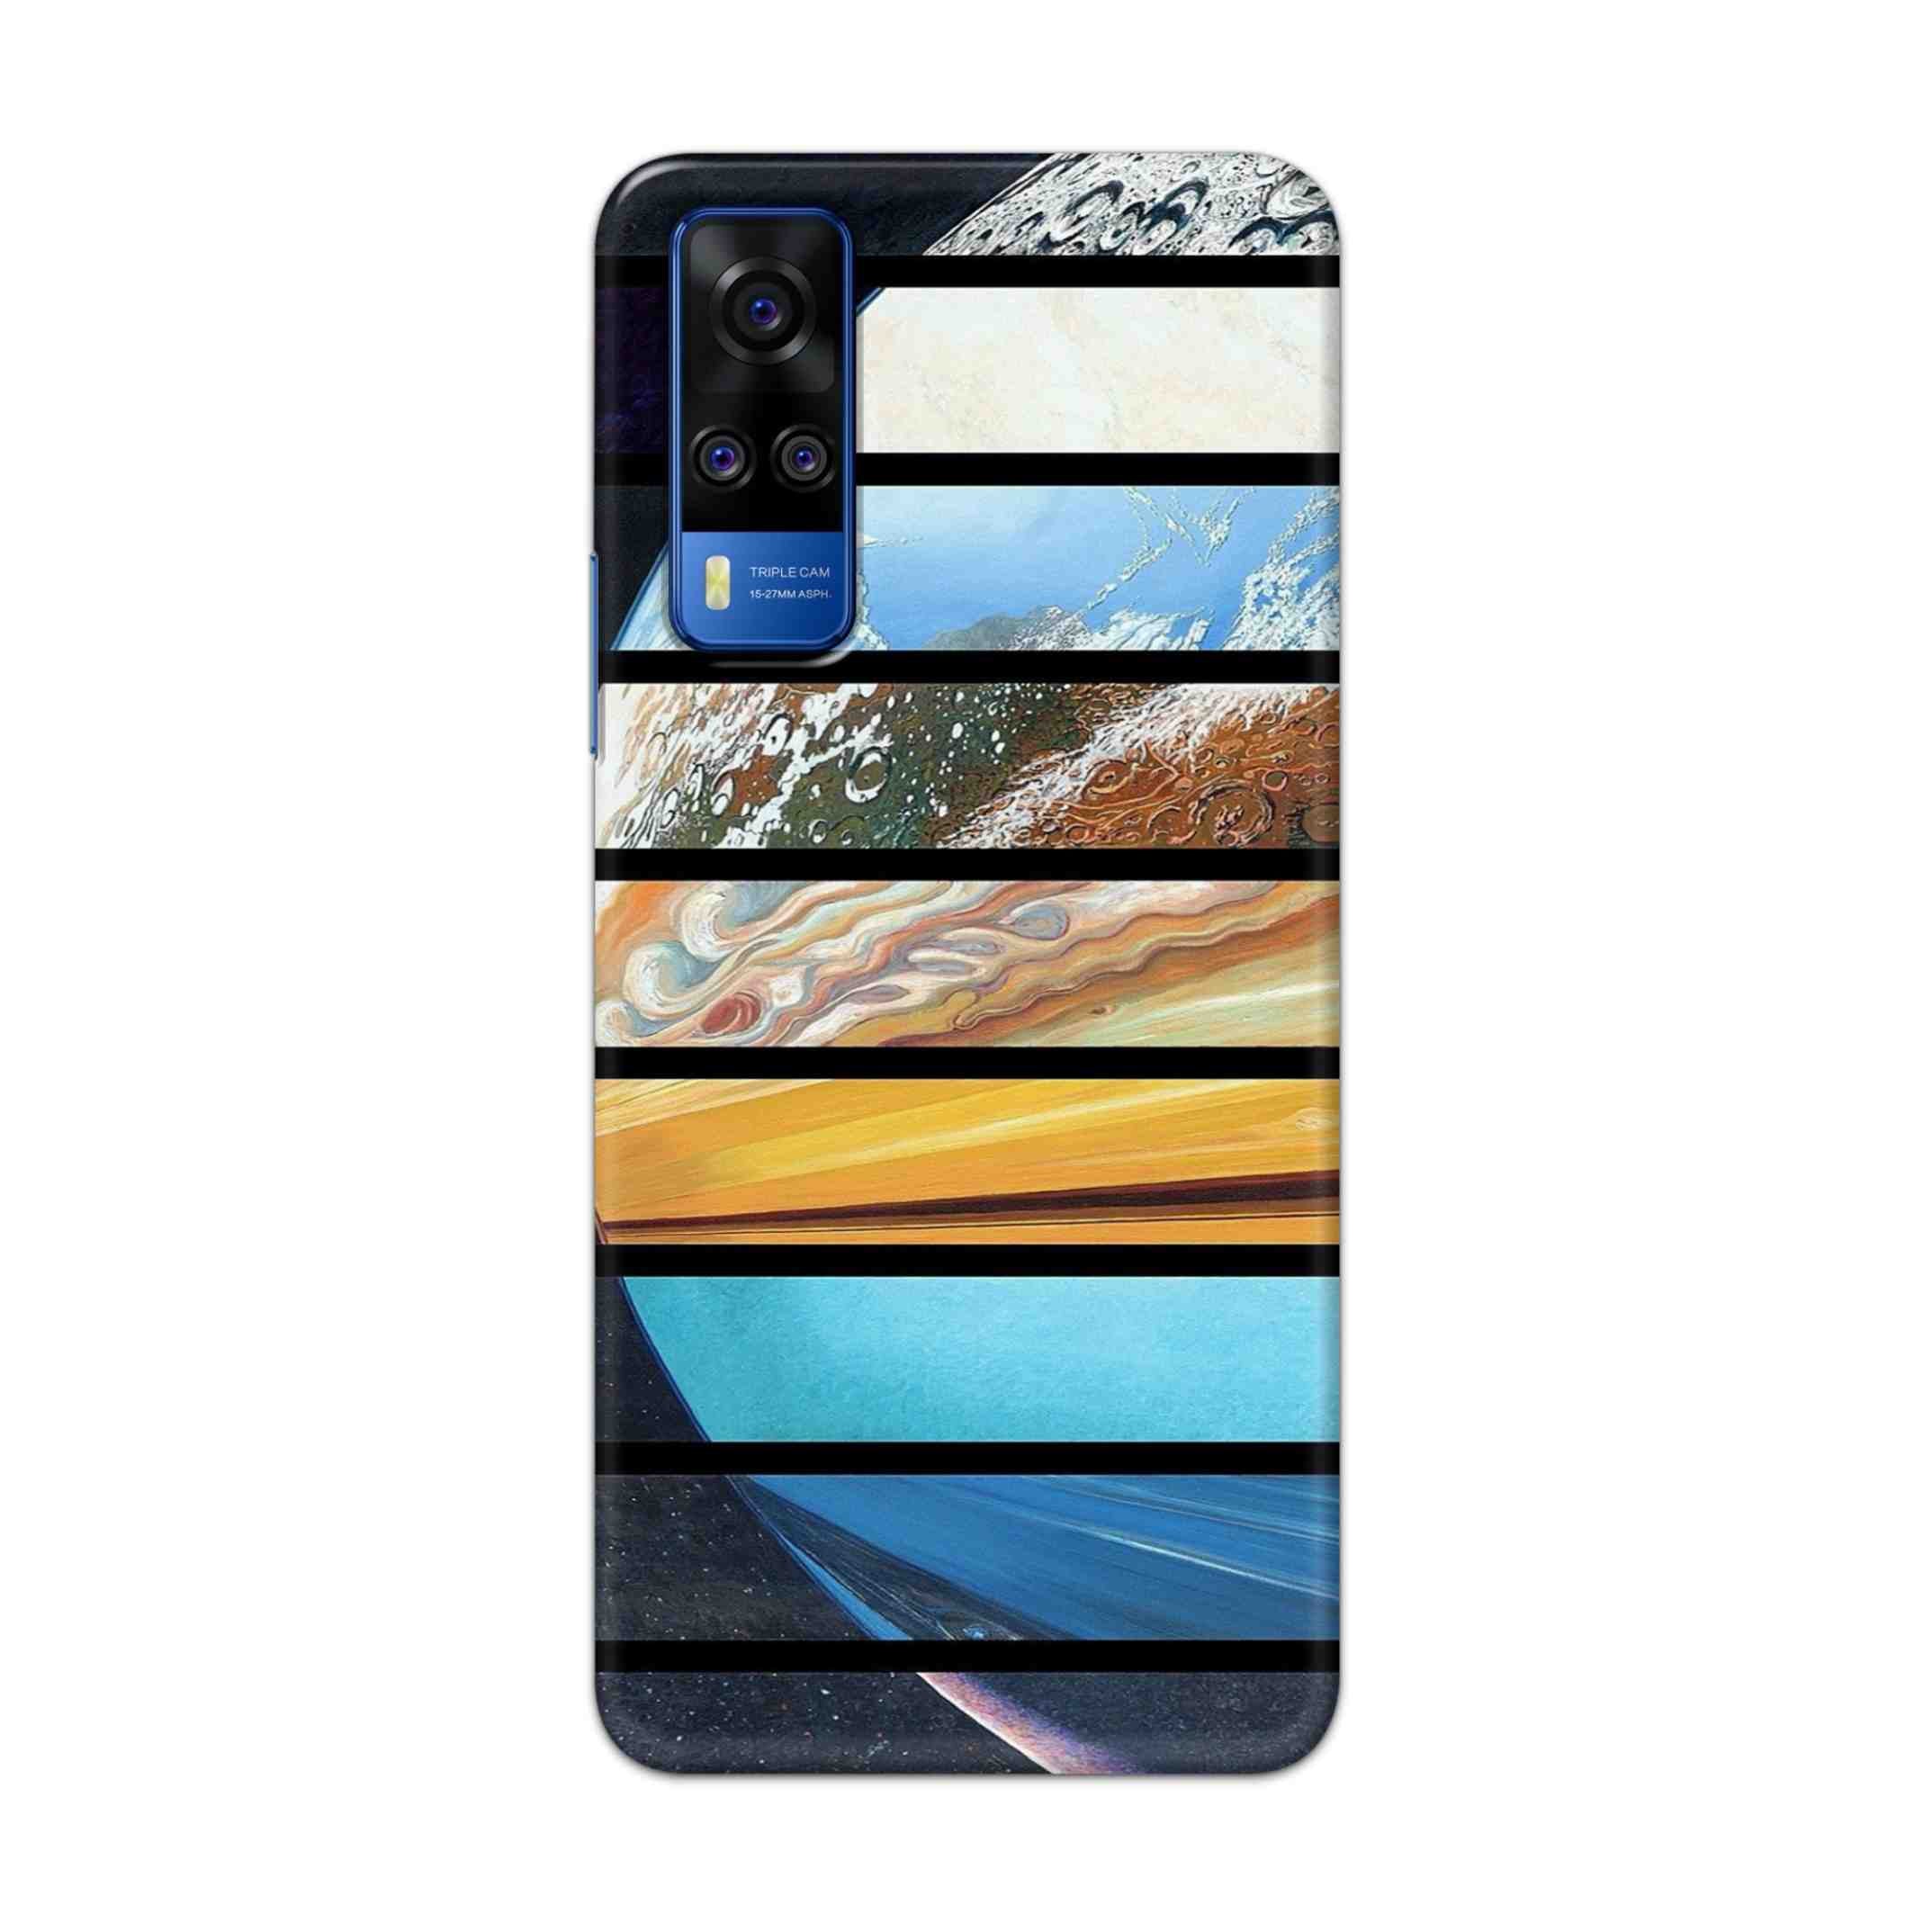 Buy Colourful Earth Hard Back Mobile Phone Case Cover For Vivo Y51a Online